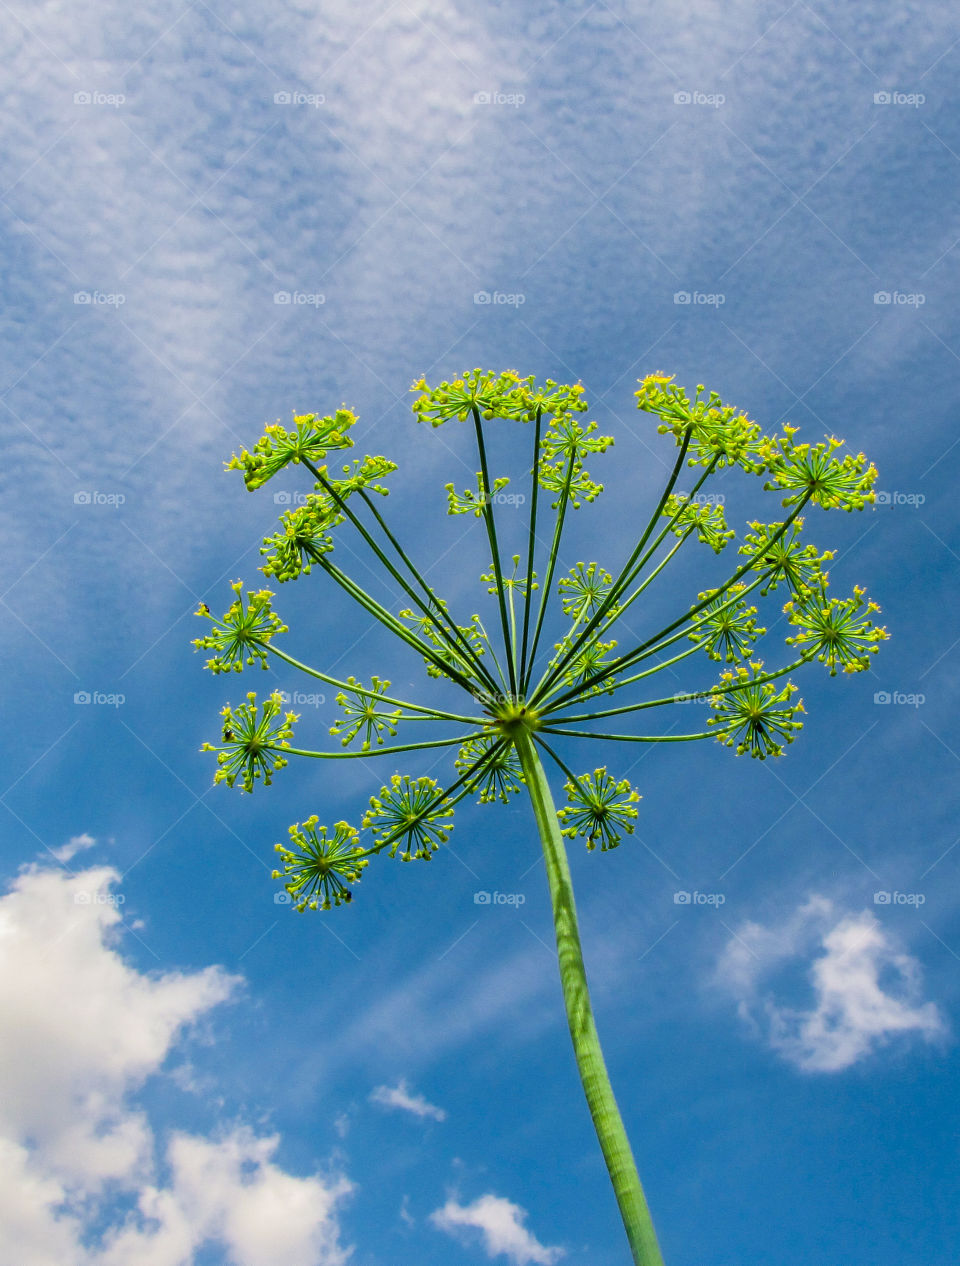 anthriscus sylvestris also know as cow parsley on blue sky whit white clouds